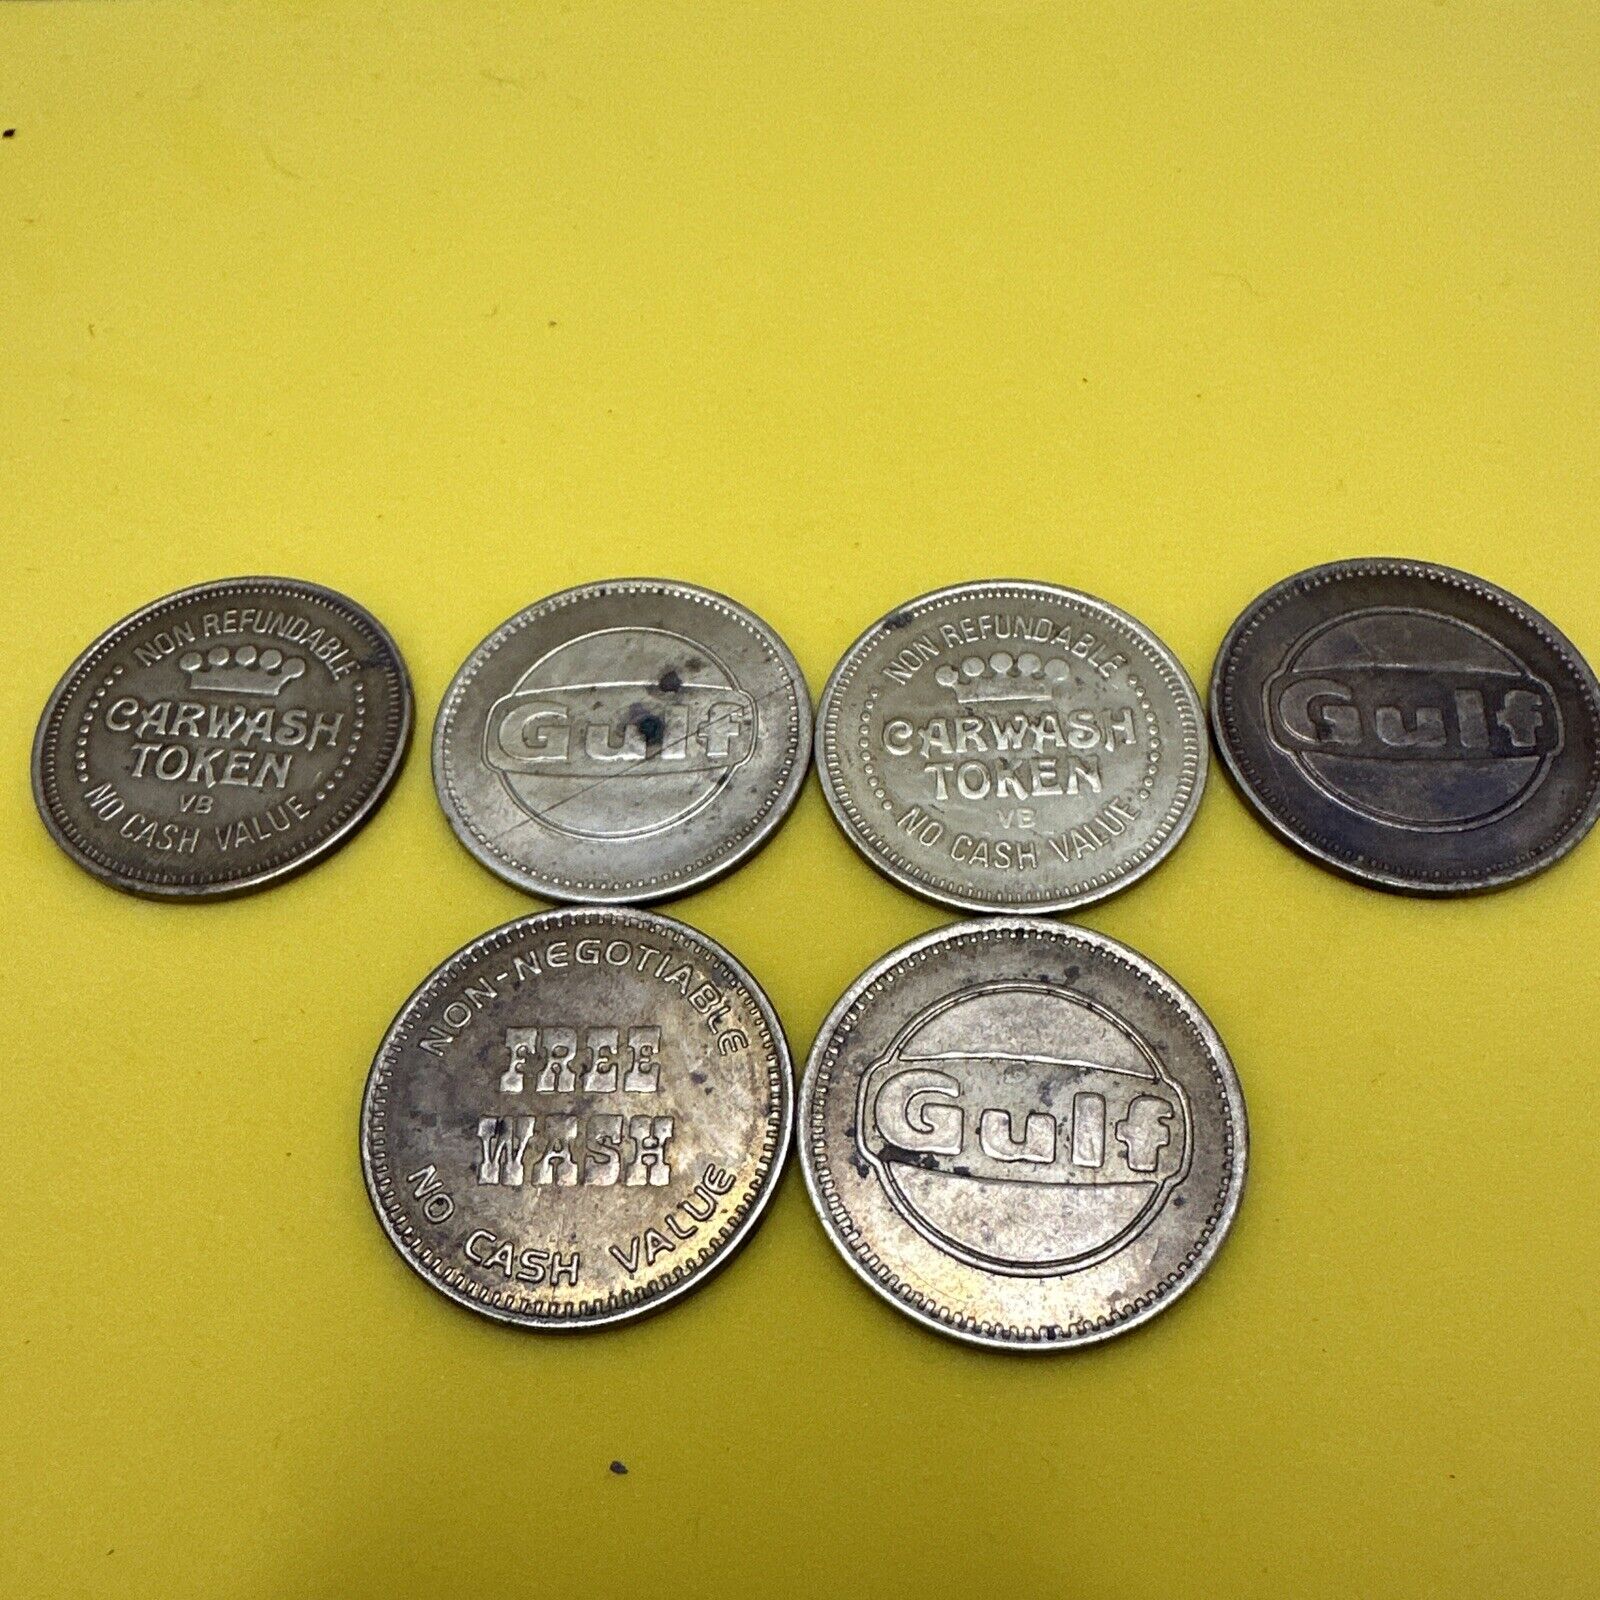 GULF Gas Fuel Station Free Car Wash Tokens Collectable Circulated 6 Tokens